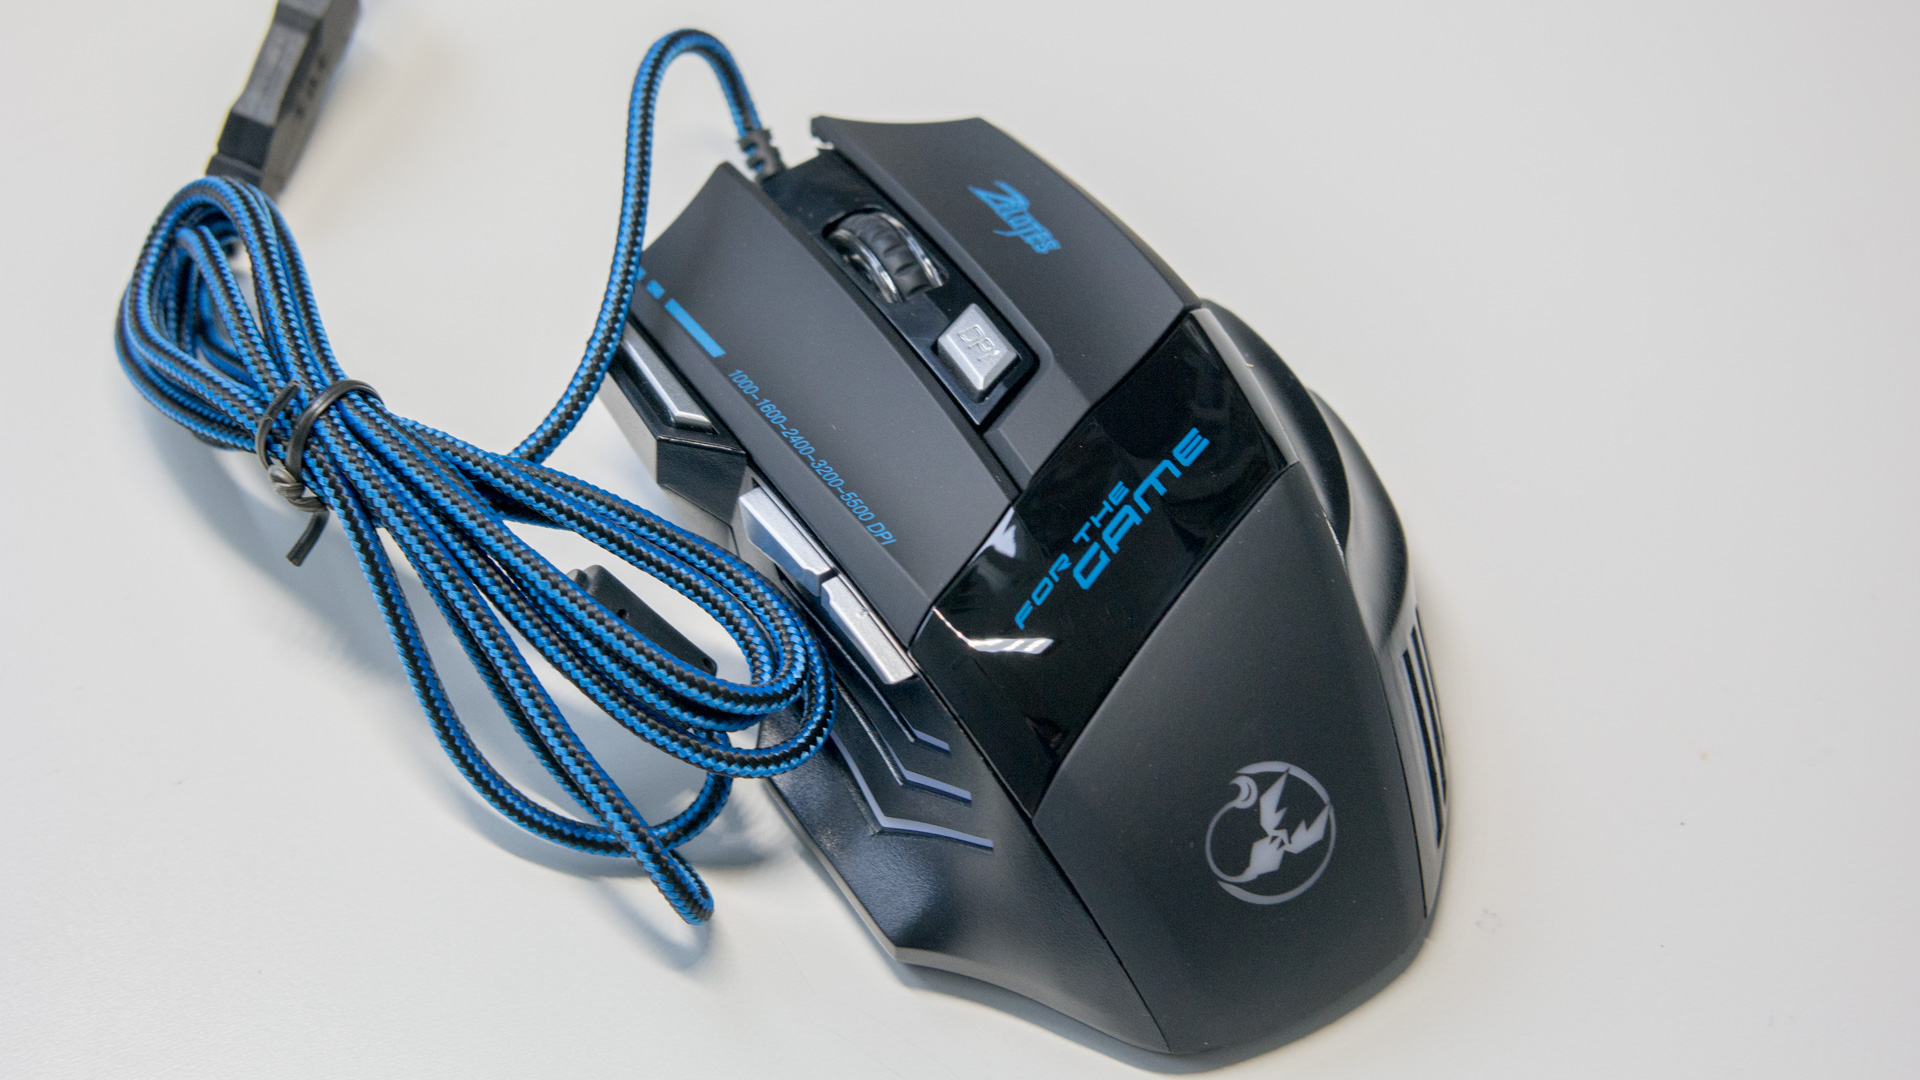 zelotes mouse software t80